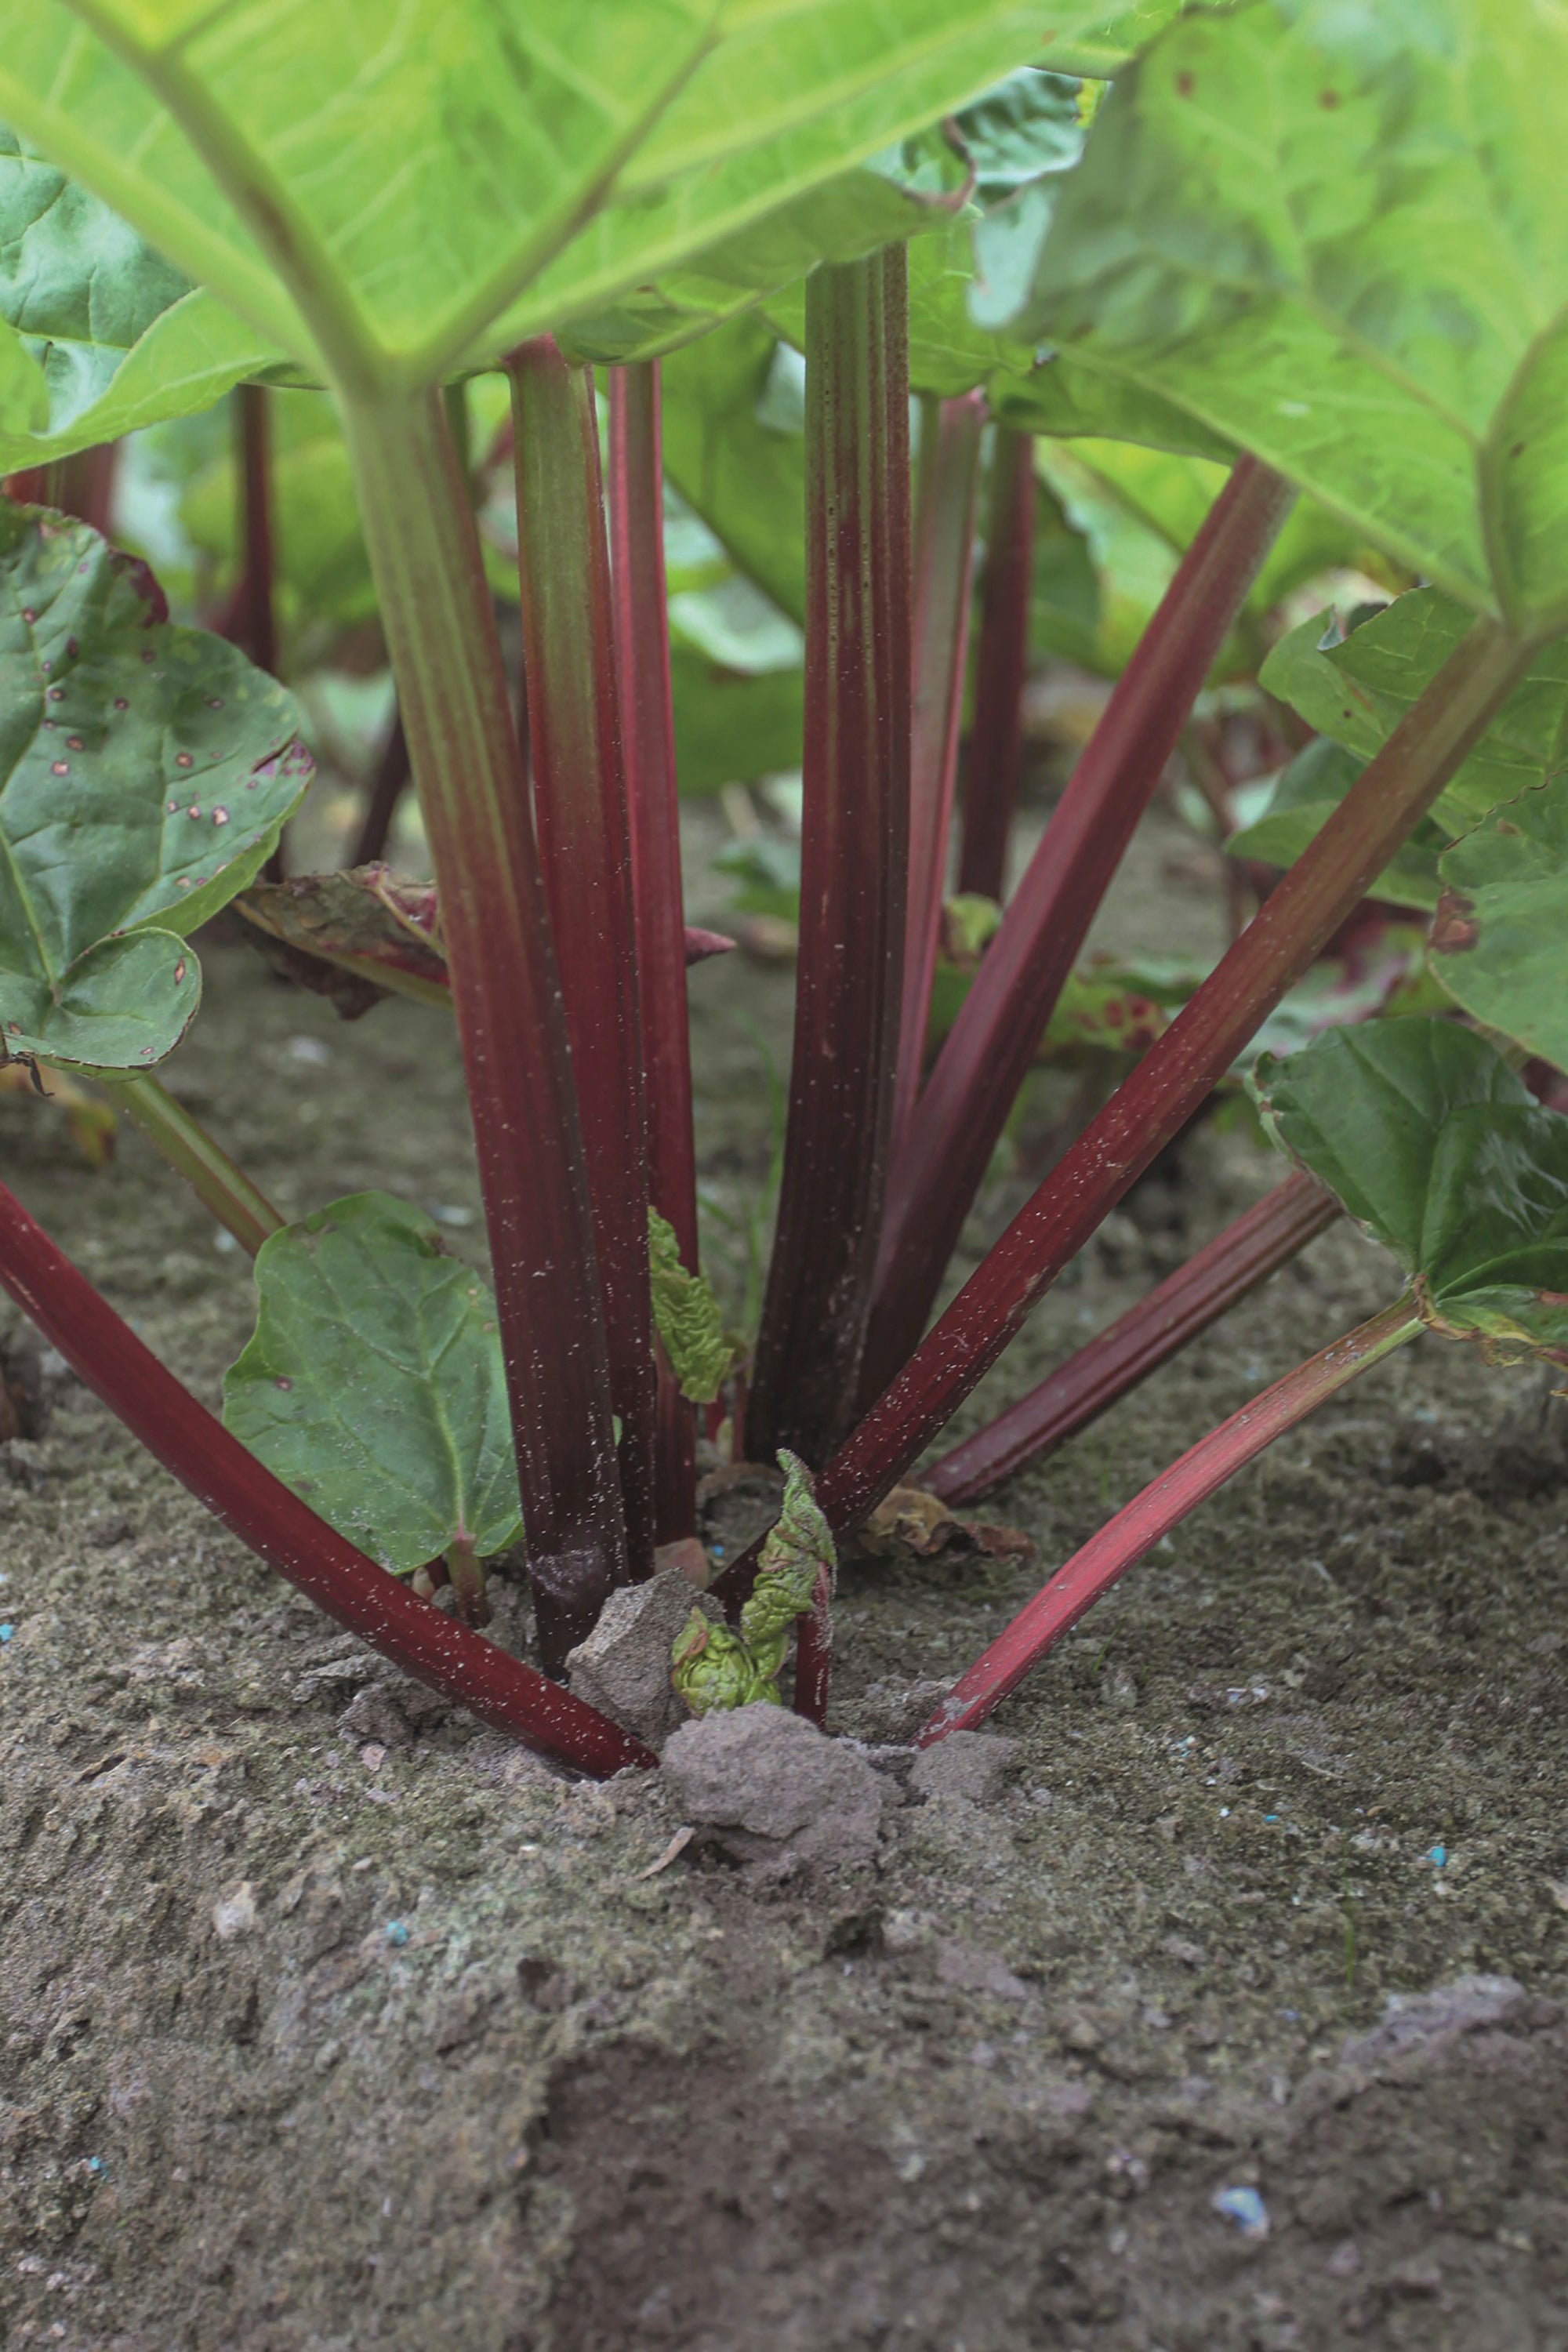 This image provided by Ball Horticultural Company shows a Canada Red rhubarb plant